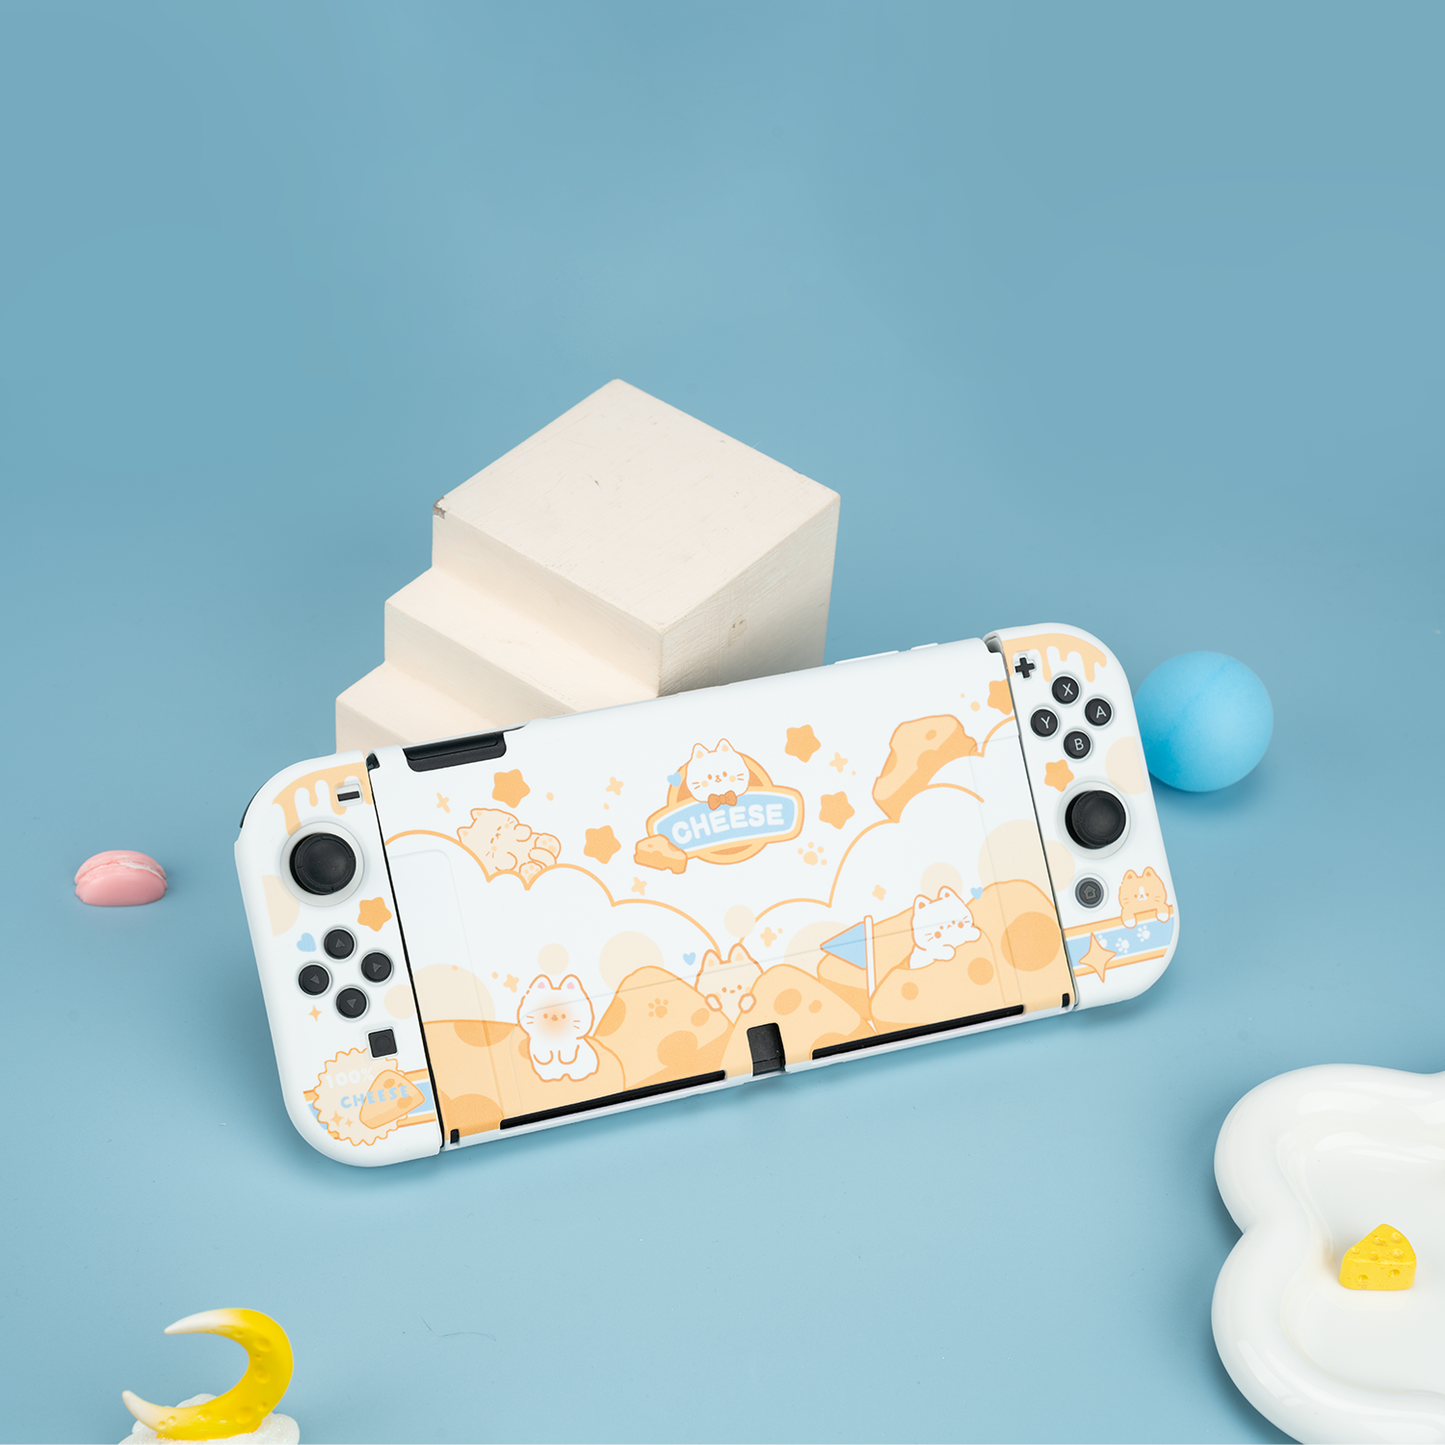 Wishaven Cheese Cat Nintendo Switch Oled Protective Case